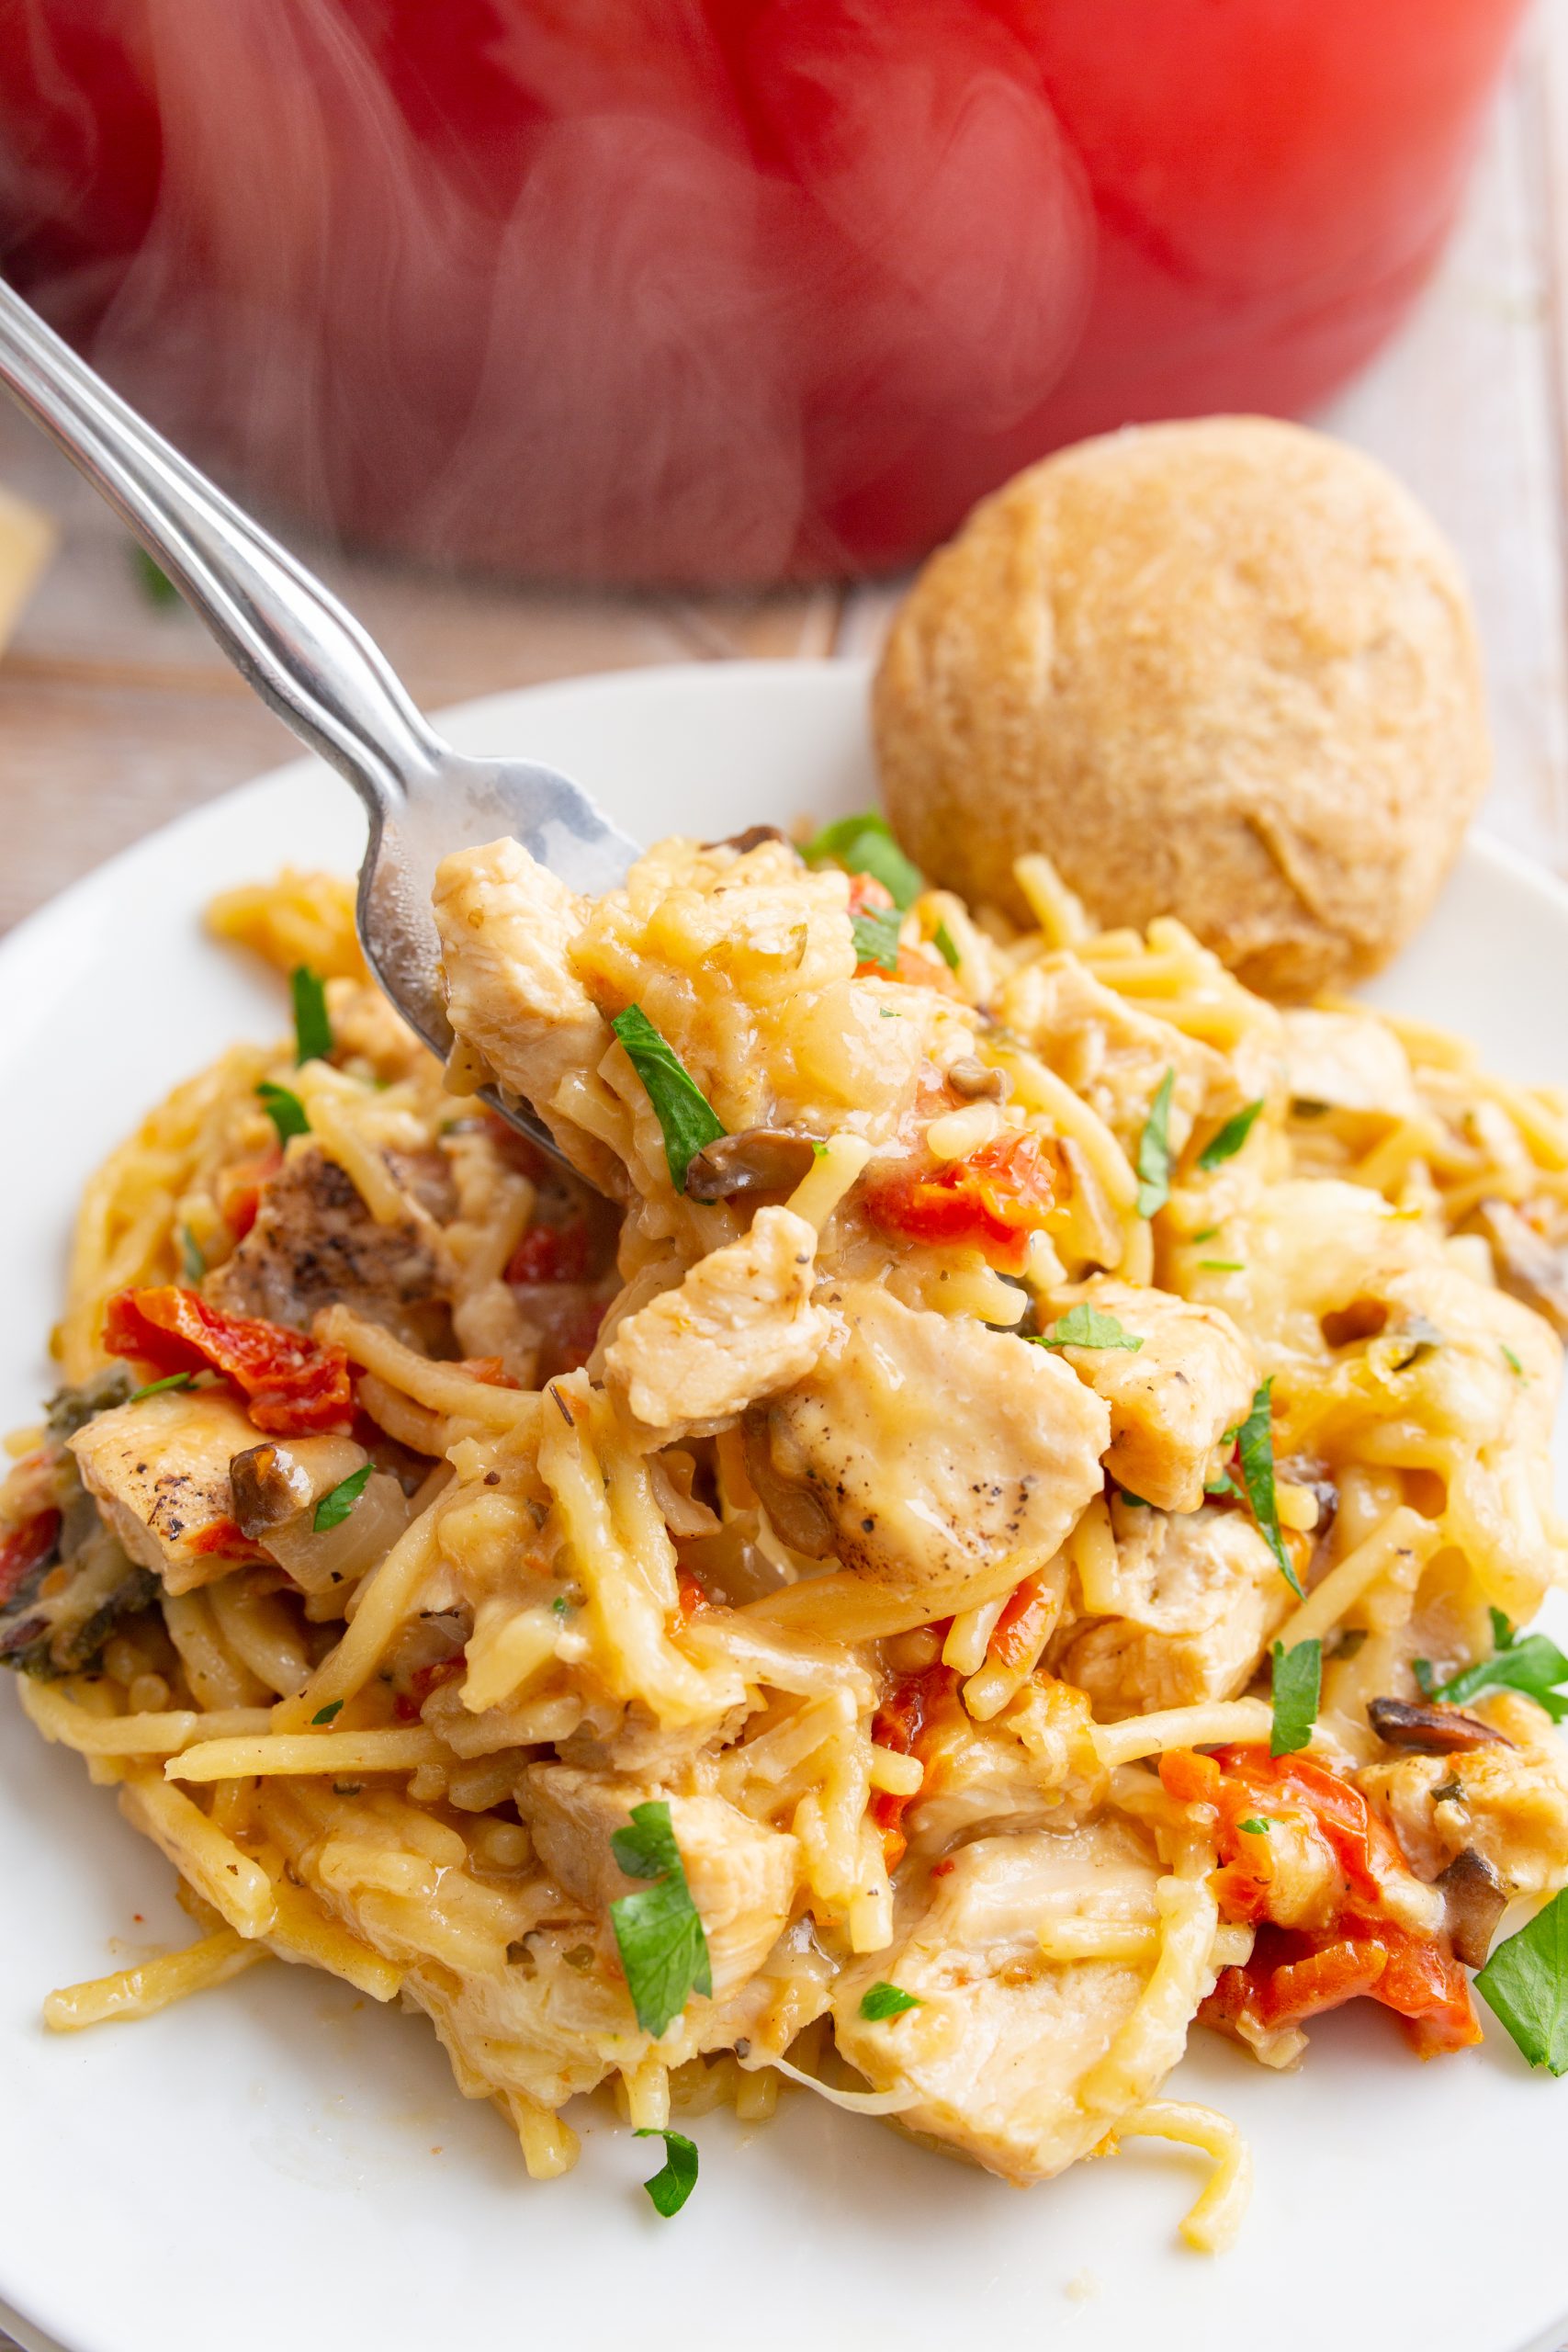 A plate of creamy chicken pasta garnished with herbs, served with a dinner roll. A fork is lifting a bite of pasta and chicken.